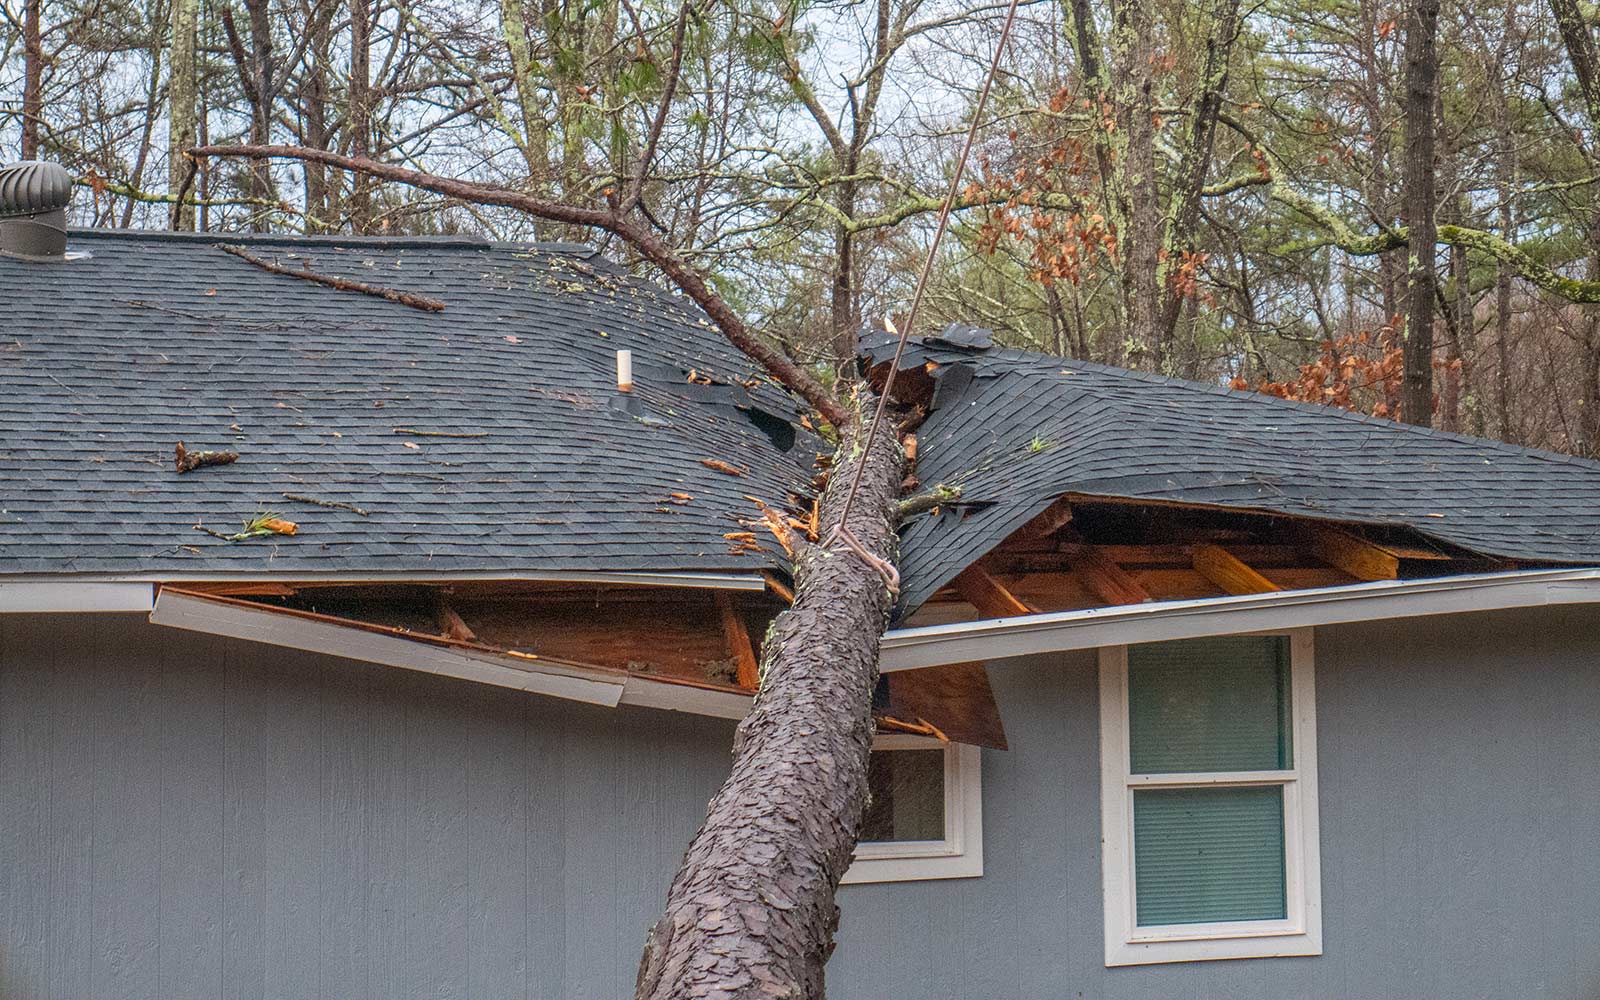 Roofing Shingles Wind Storm and Tree Damage